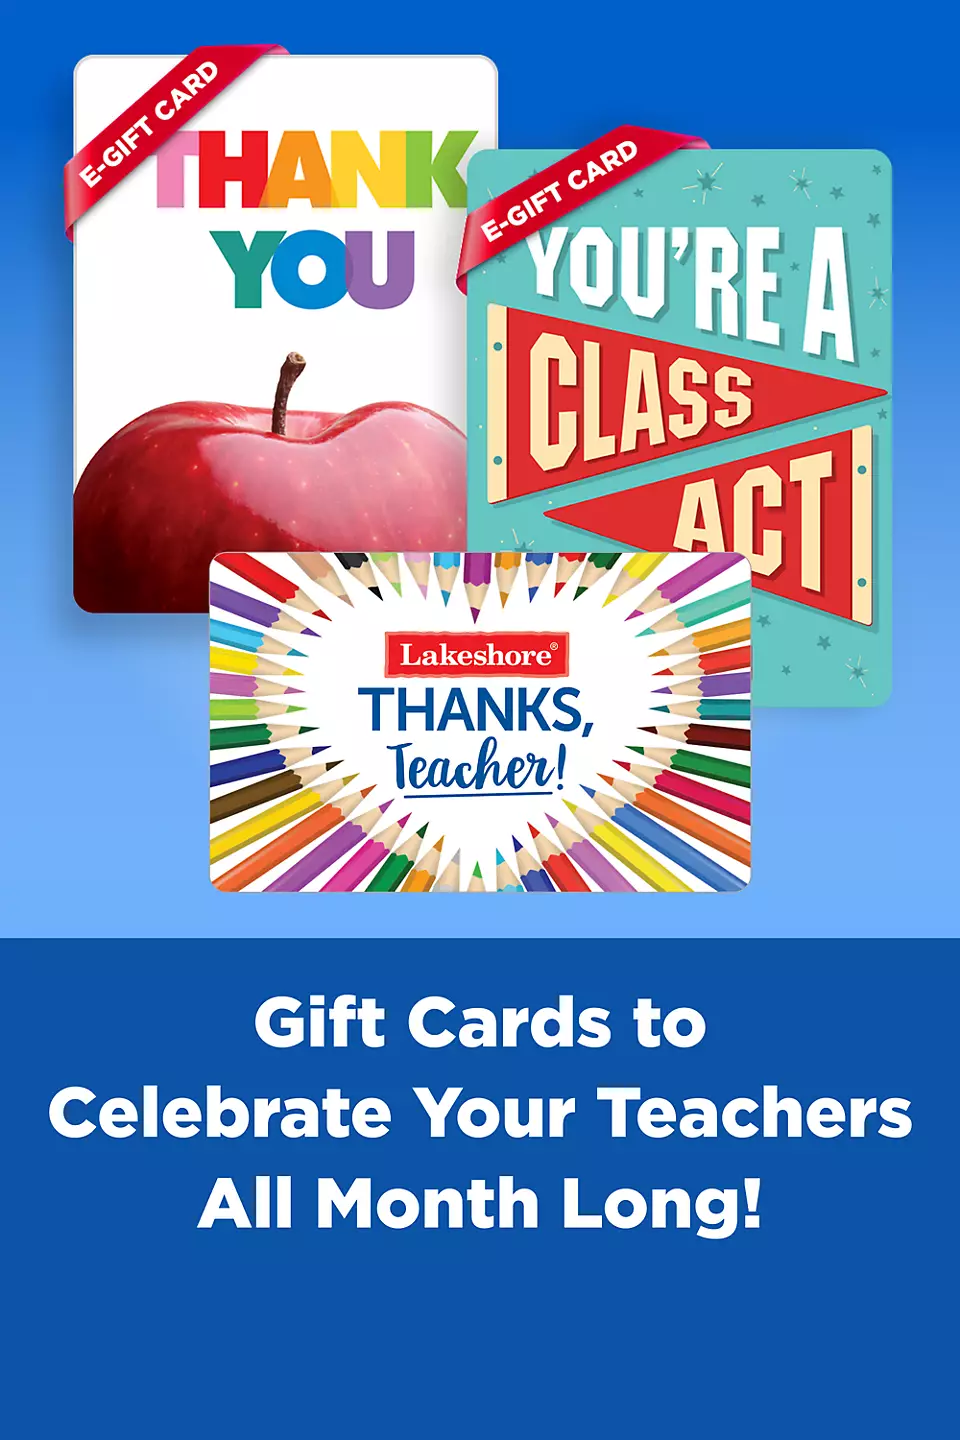 Thank your teachers with a gift card! Click to shop now.